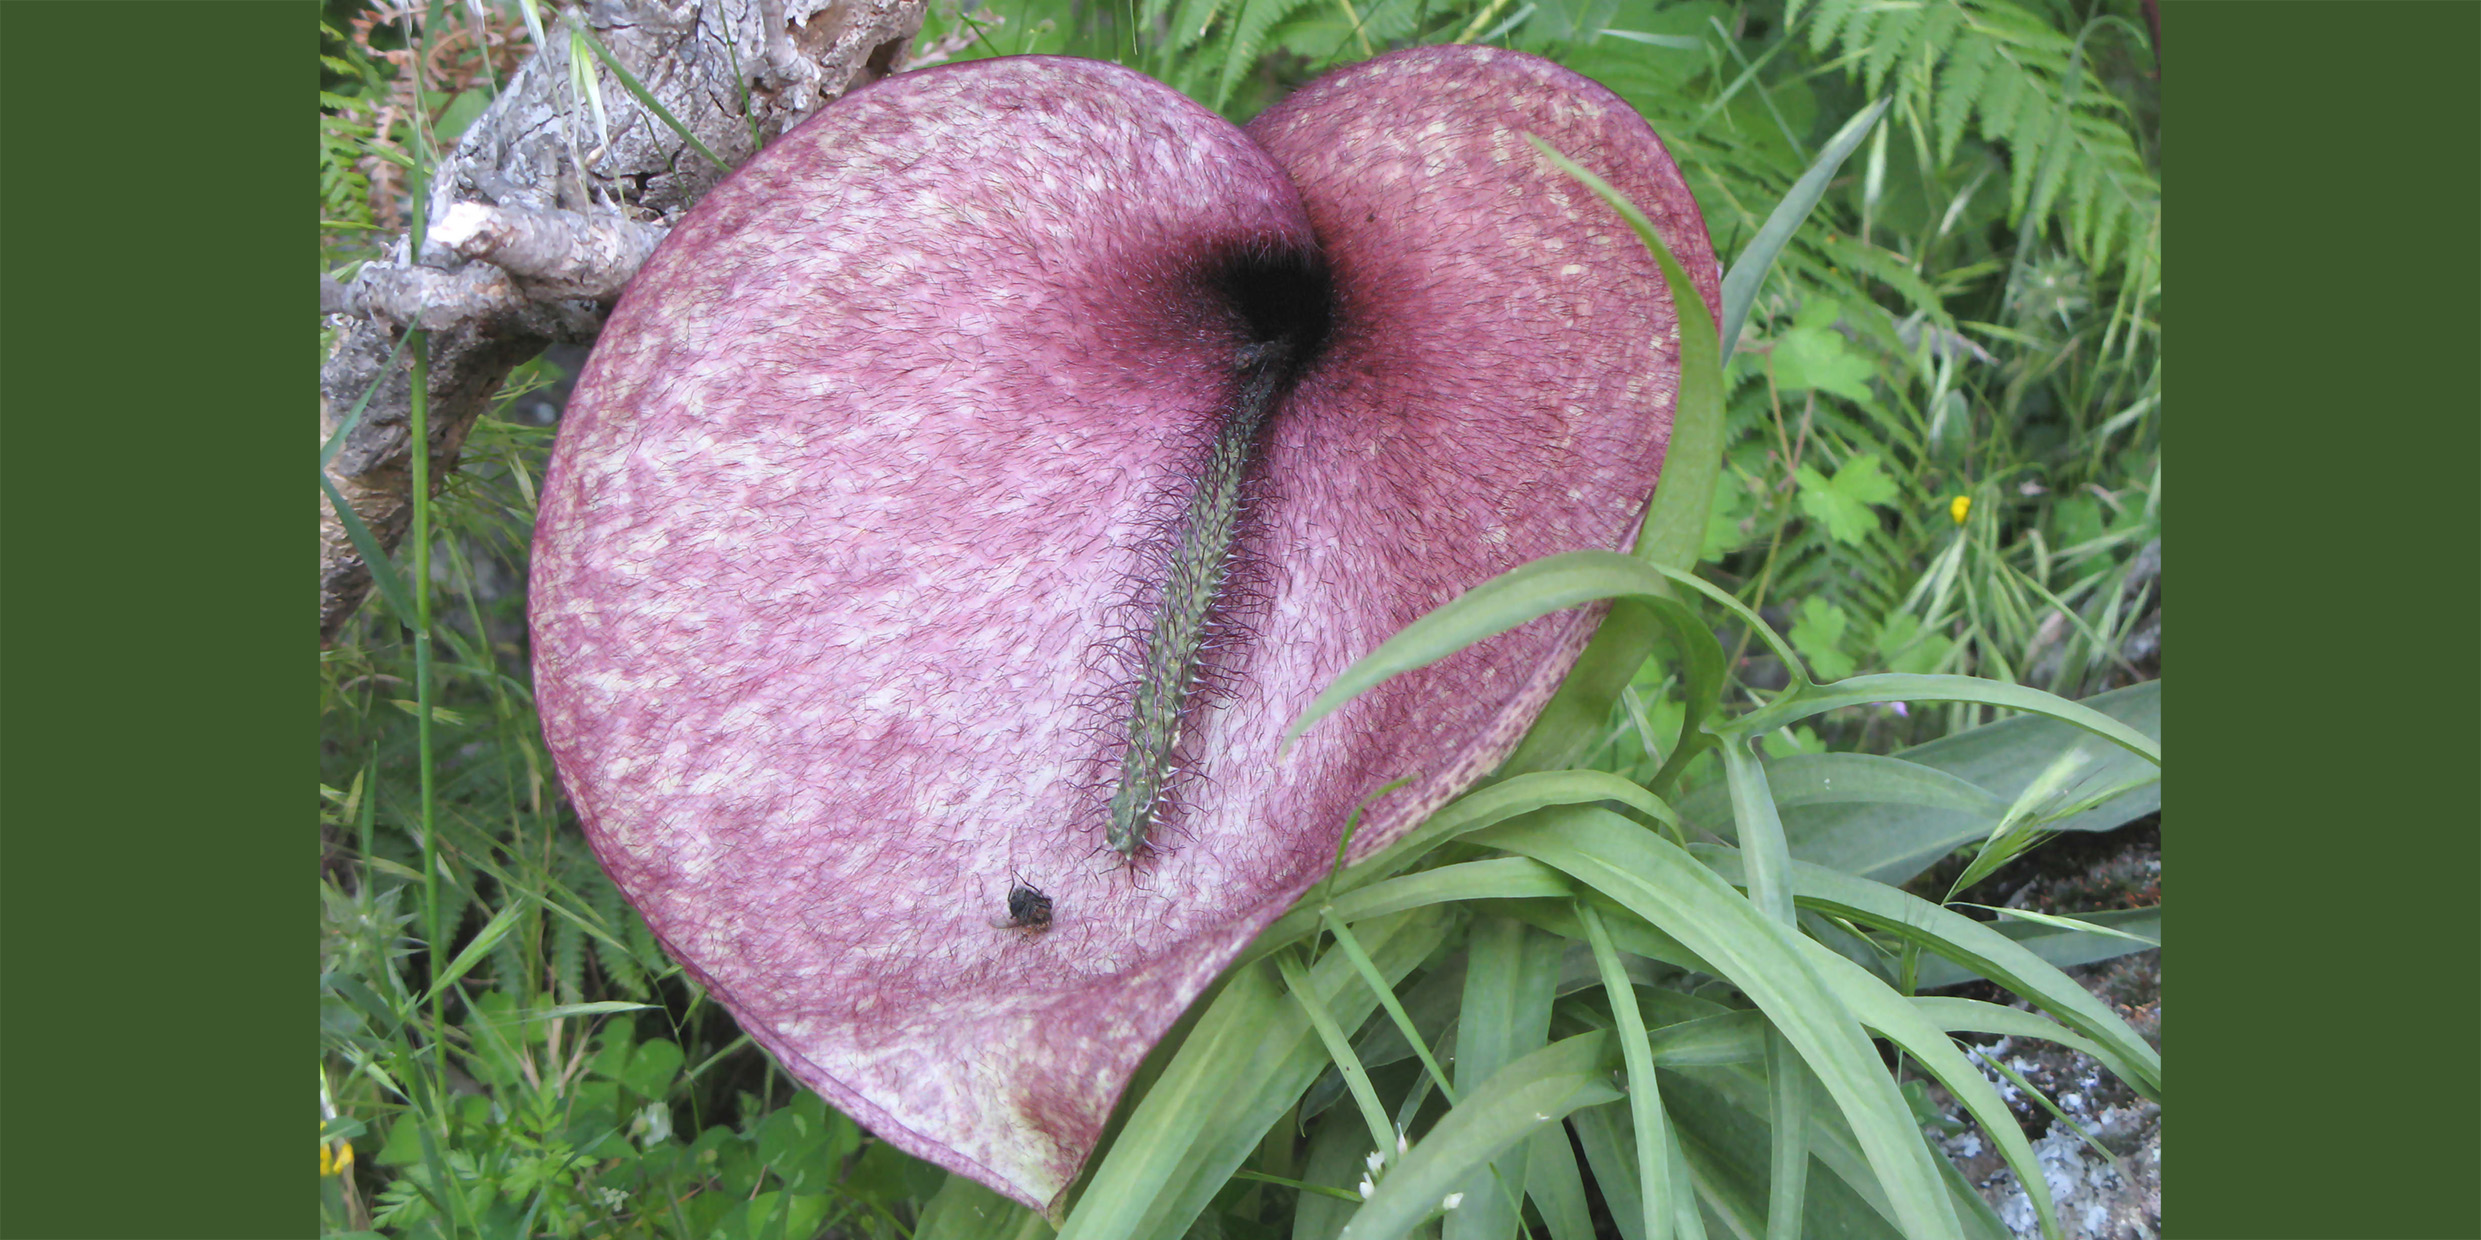 Image of a pink heart-shaped flower with a fly on it